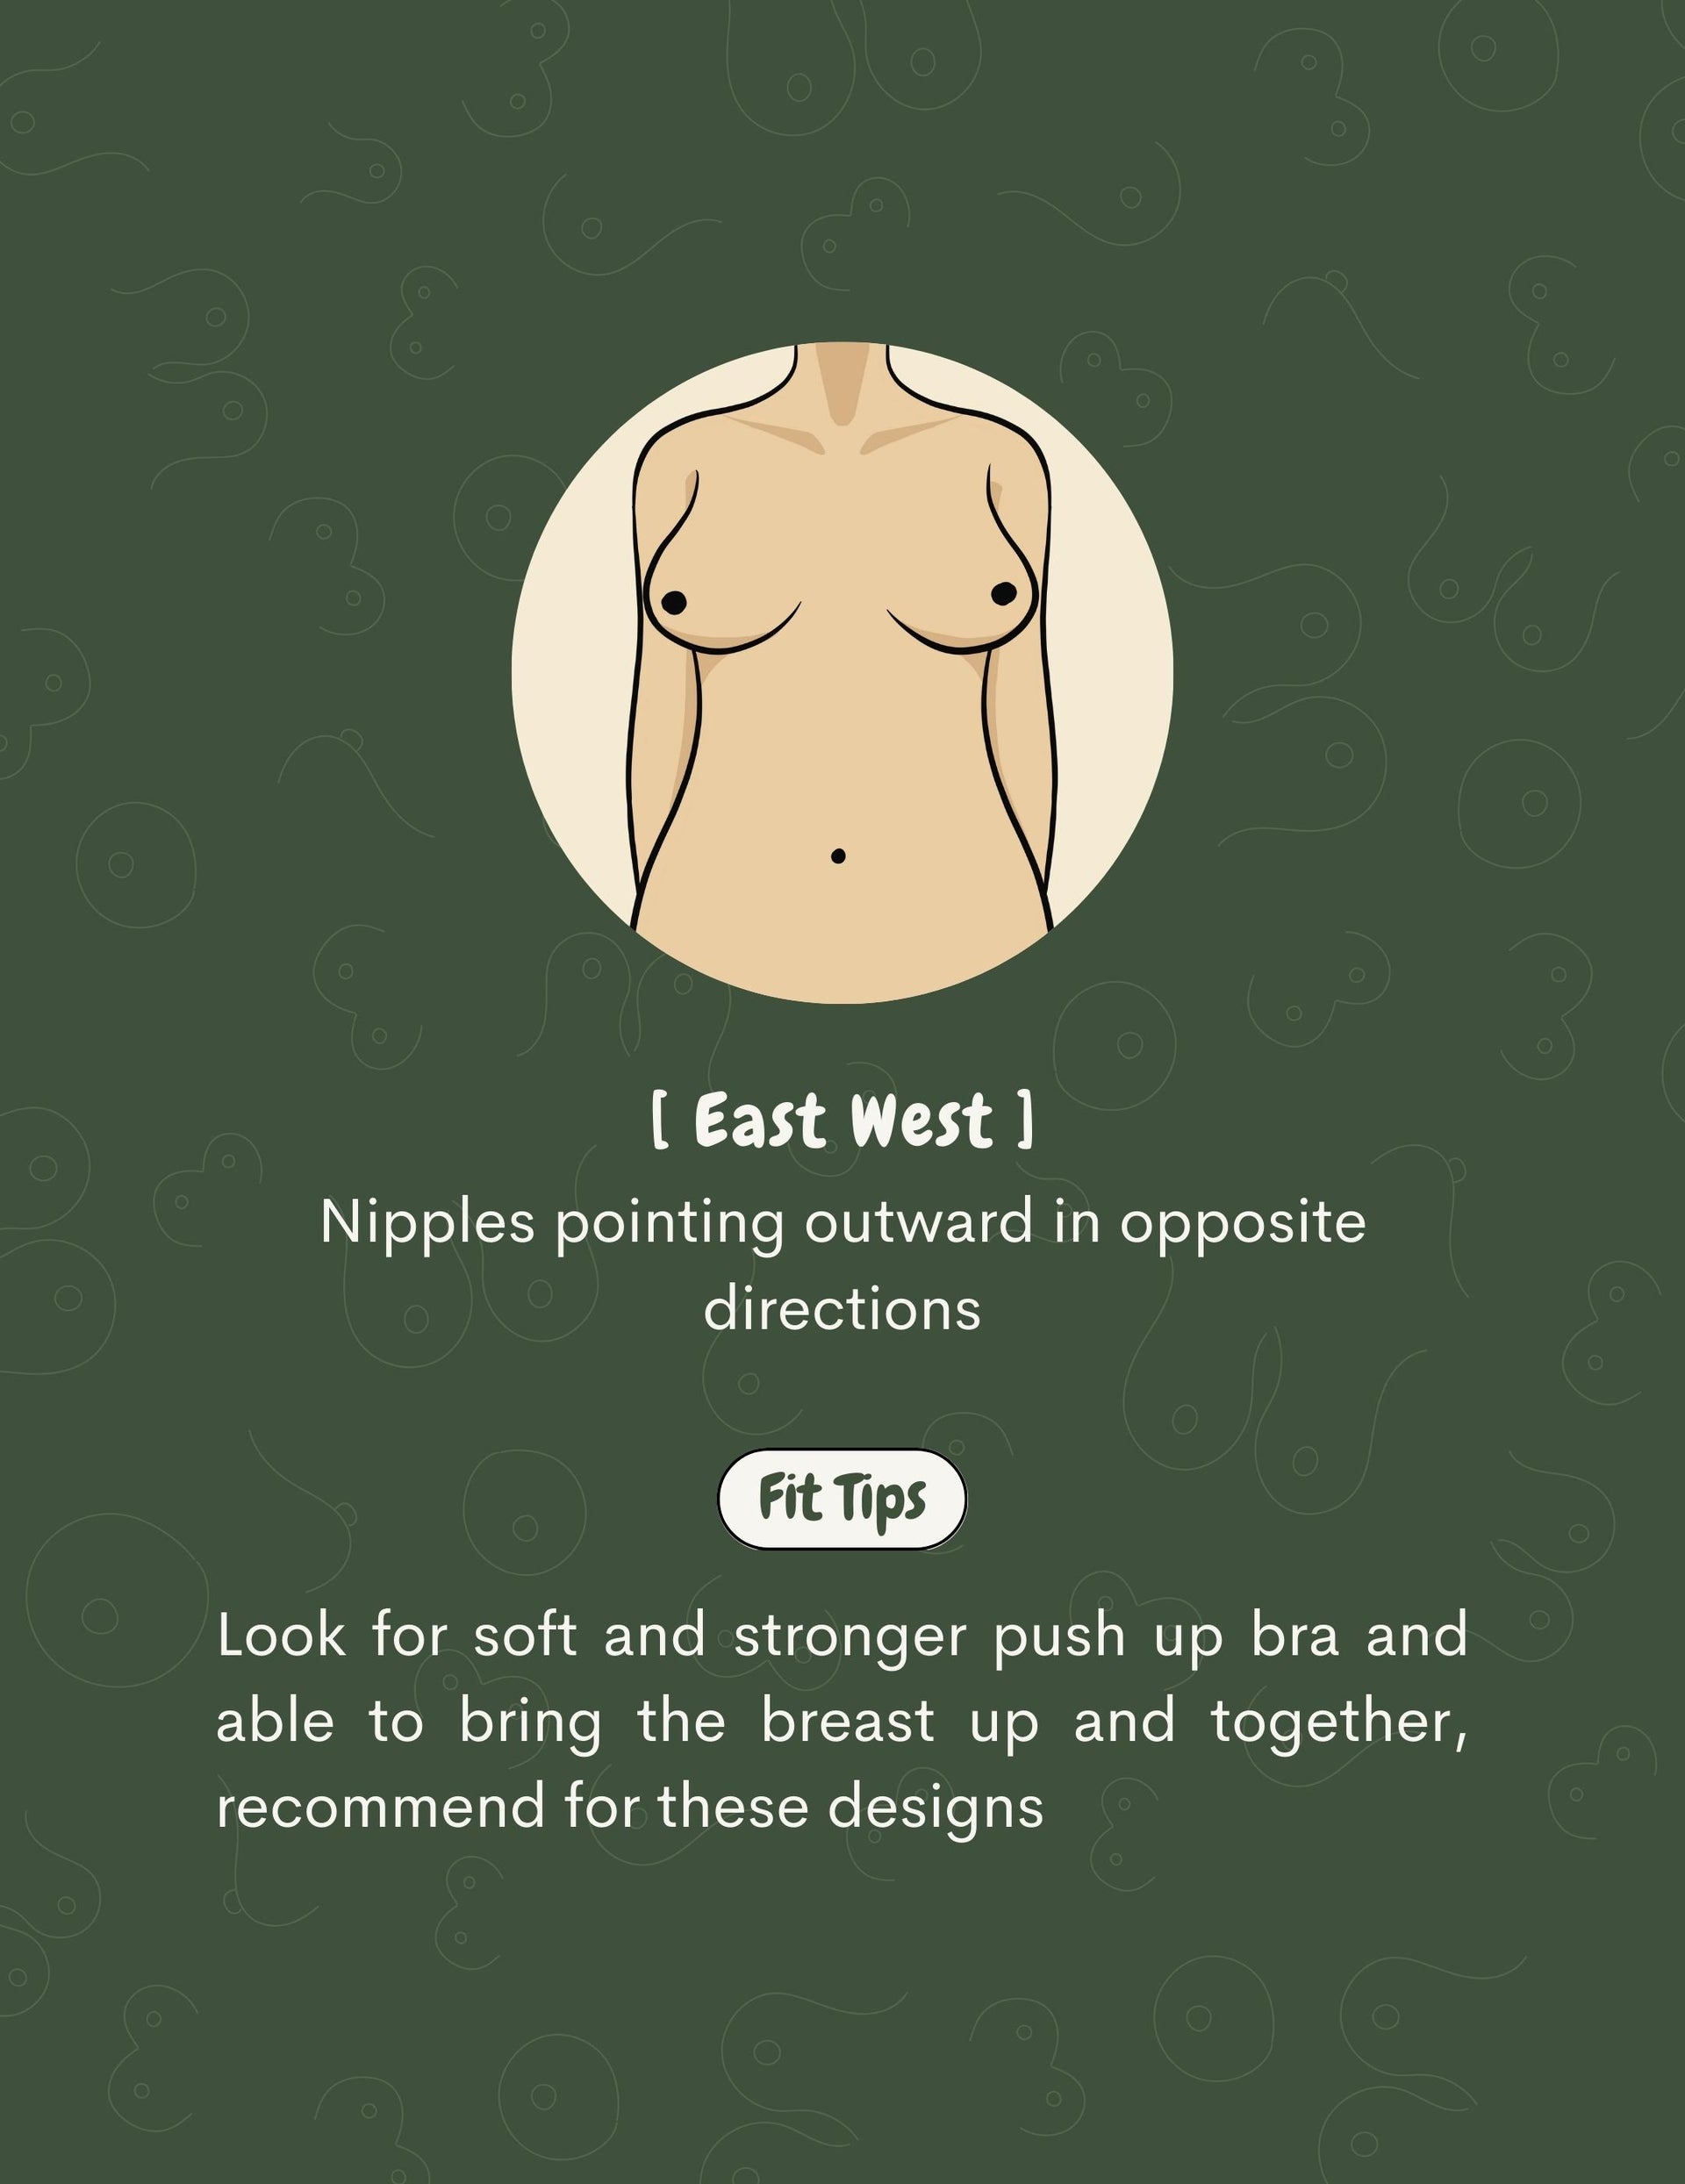 East West Breast - Nipples pointing outward in opposite directions